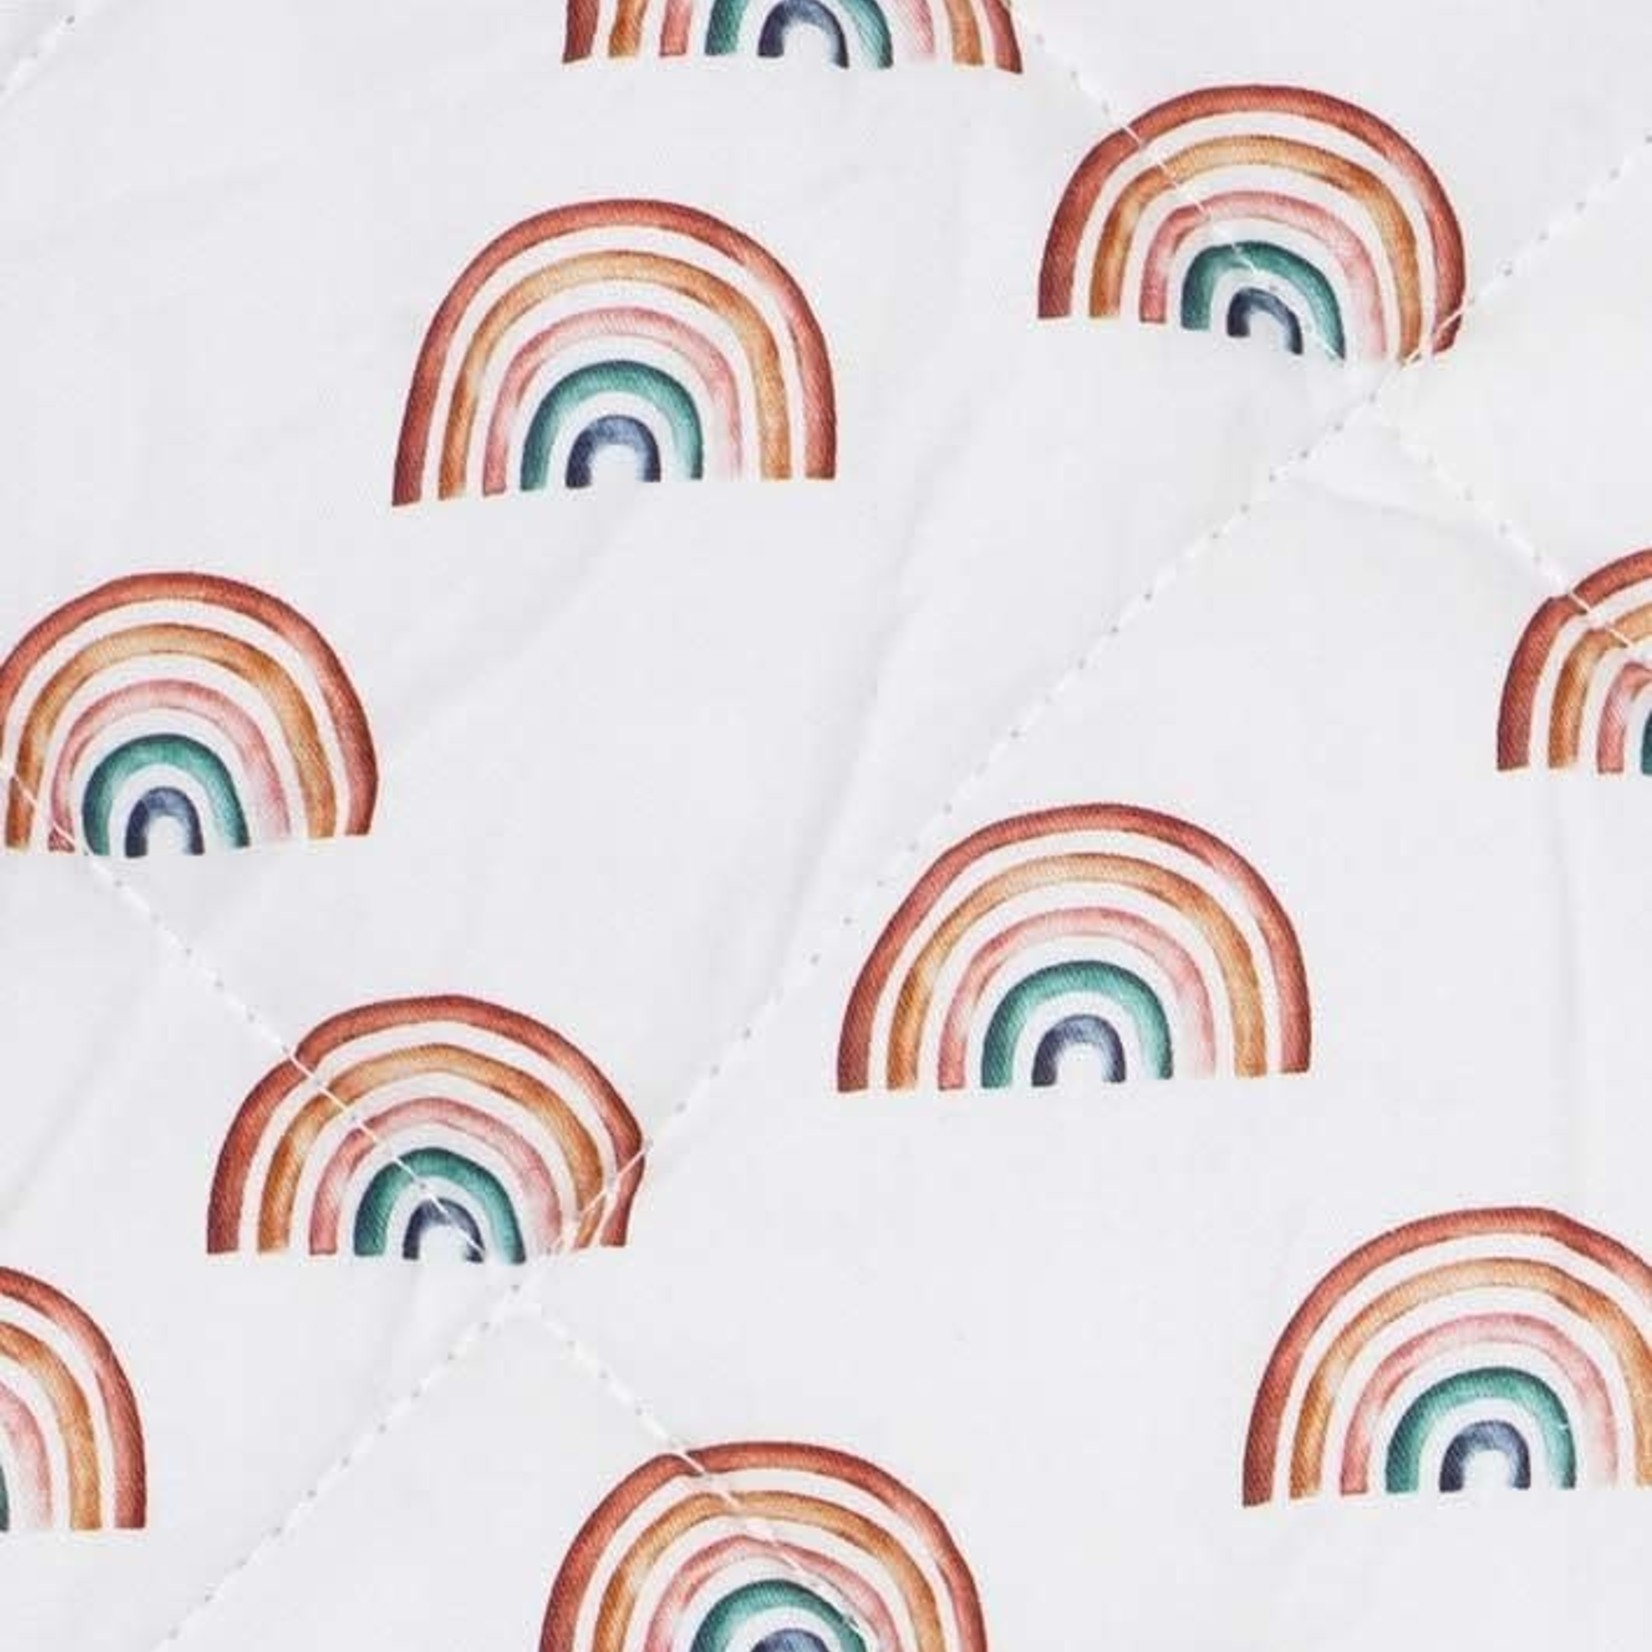 Outlookbaby 3 Piece Harness Cover Set - Rainbows